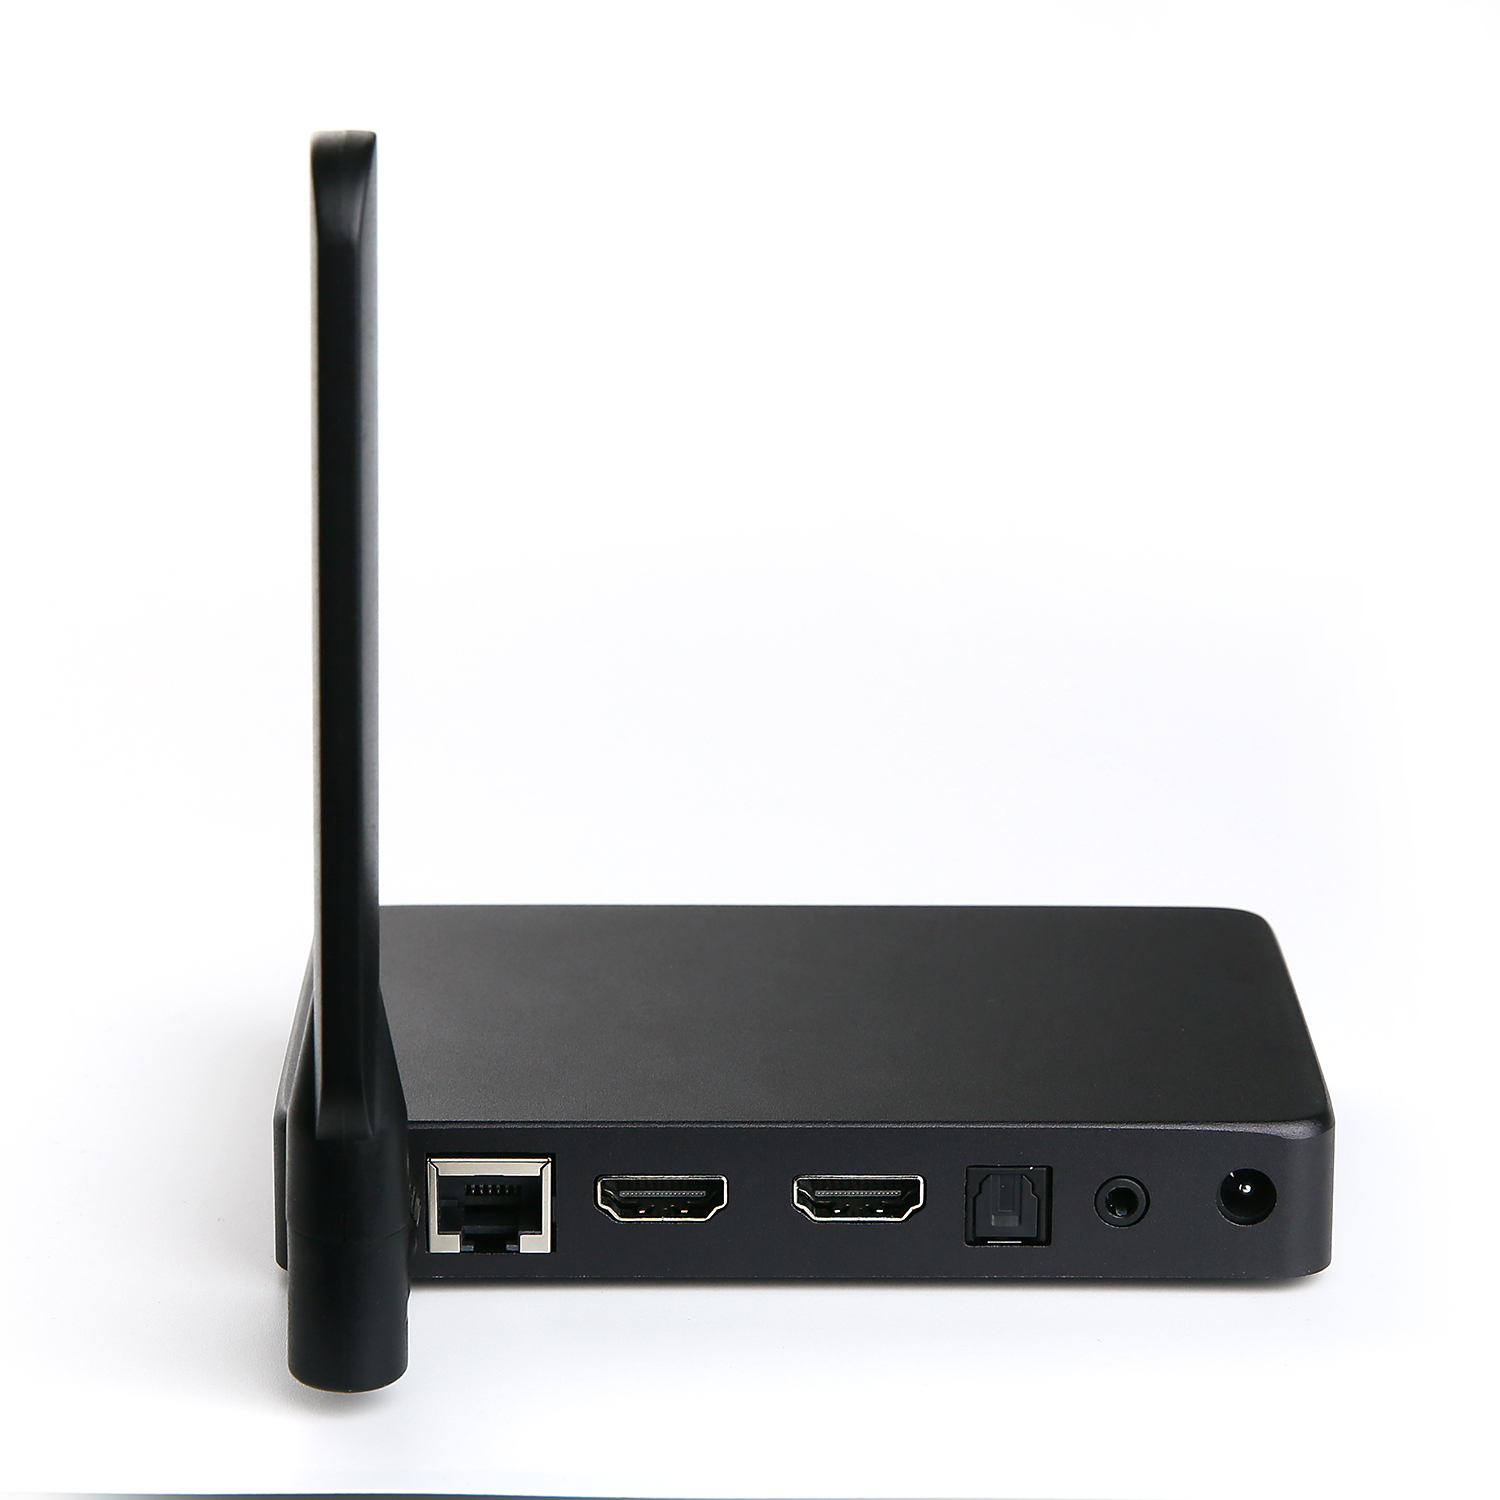 Realtek RTD1295 Android TV Box 4K Android TV Box Fabricante